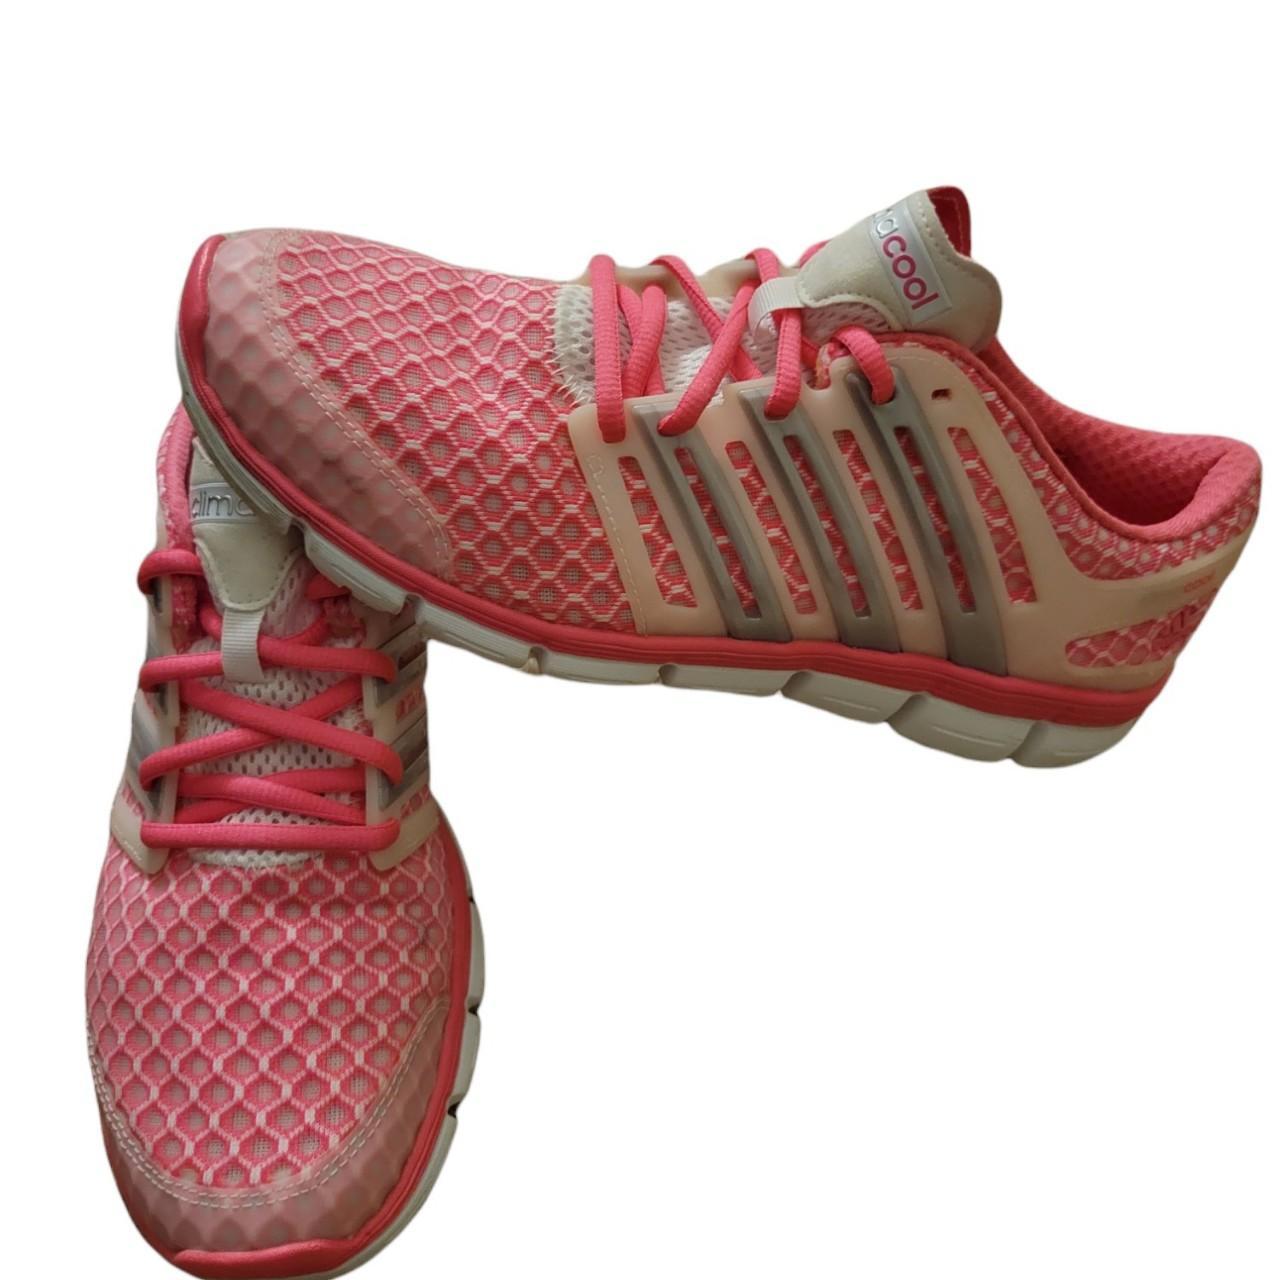 adidas Climacool W Pink White Women Running Sports Shoes Sneakers